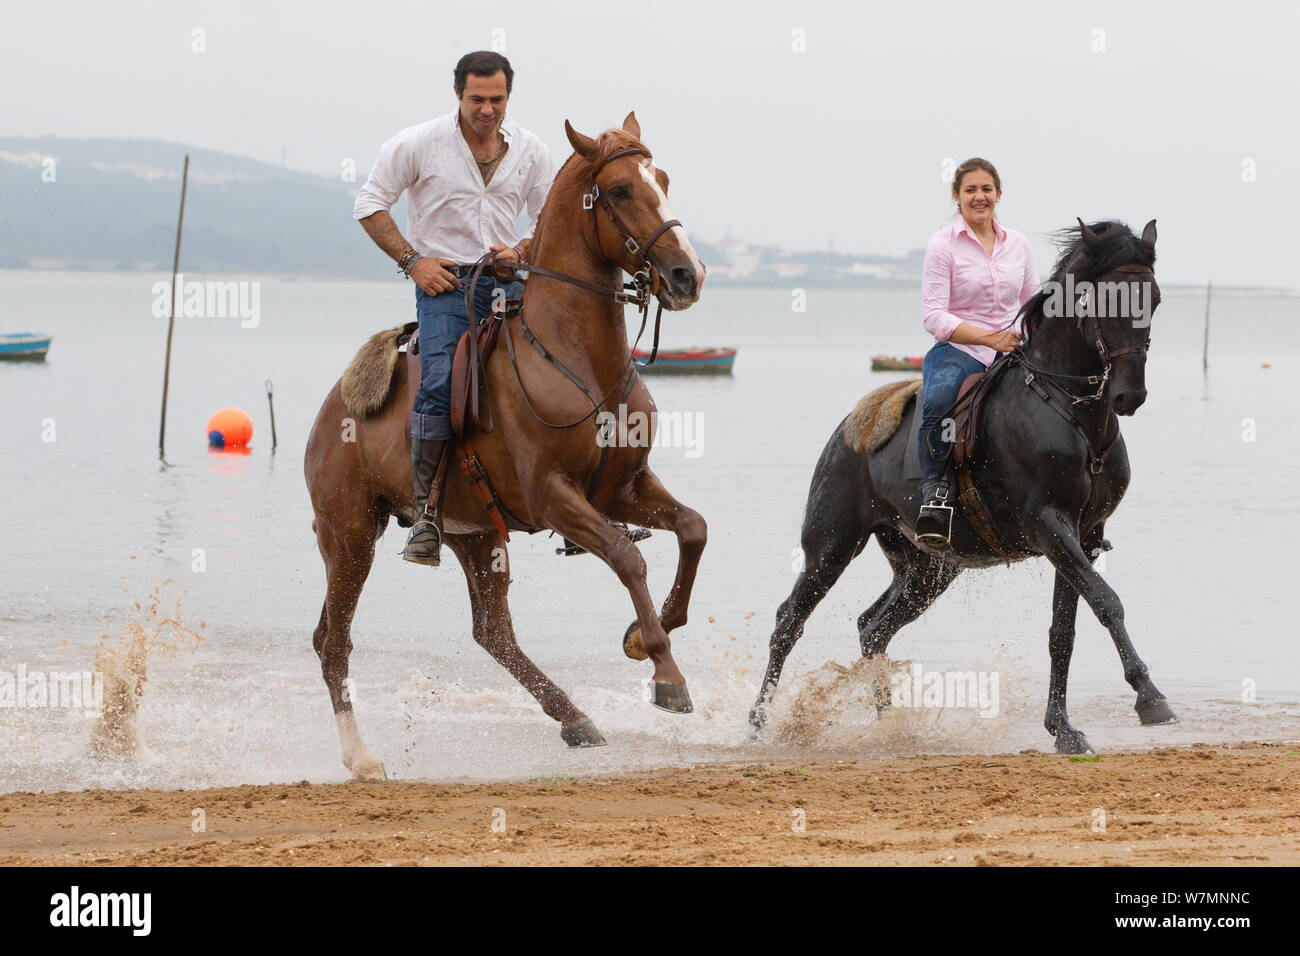 Lusitano horse, man and woman riding through water, Portugal, May 2011, model released Stock Photo